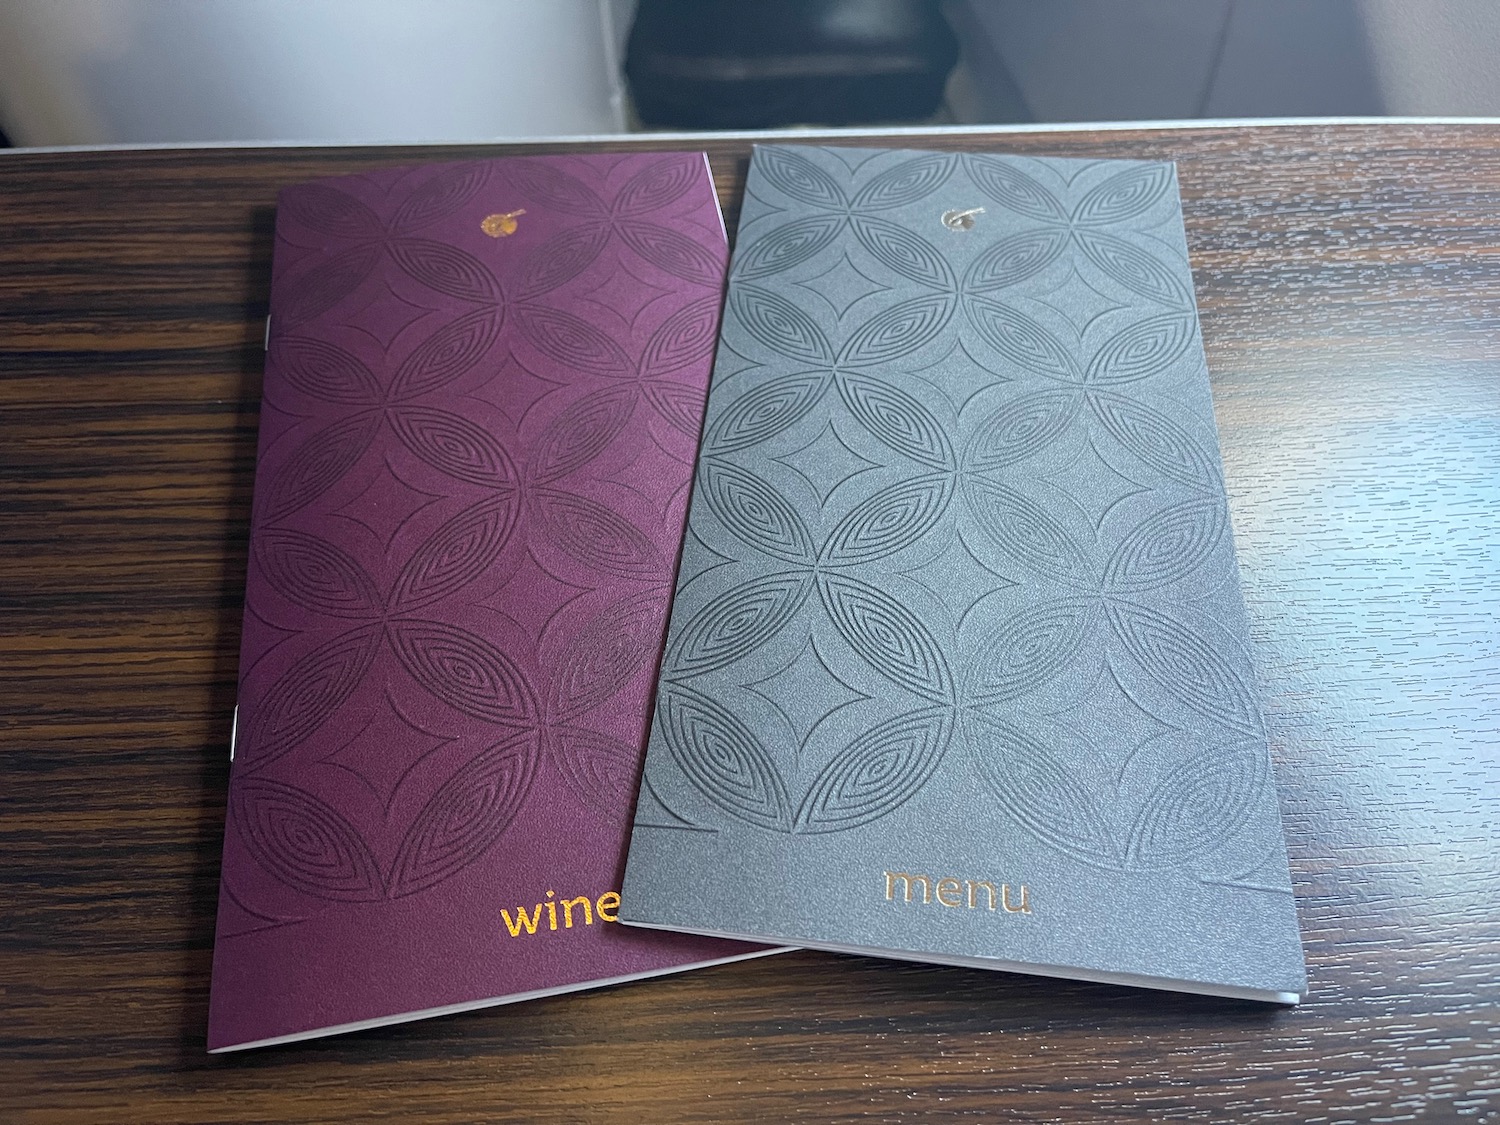 a two menus on a table